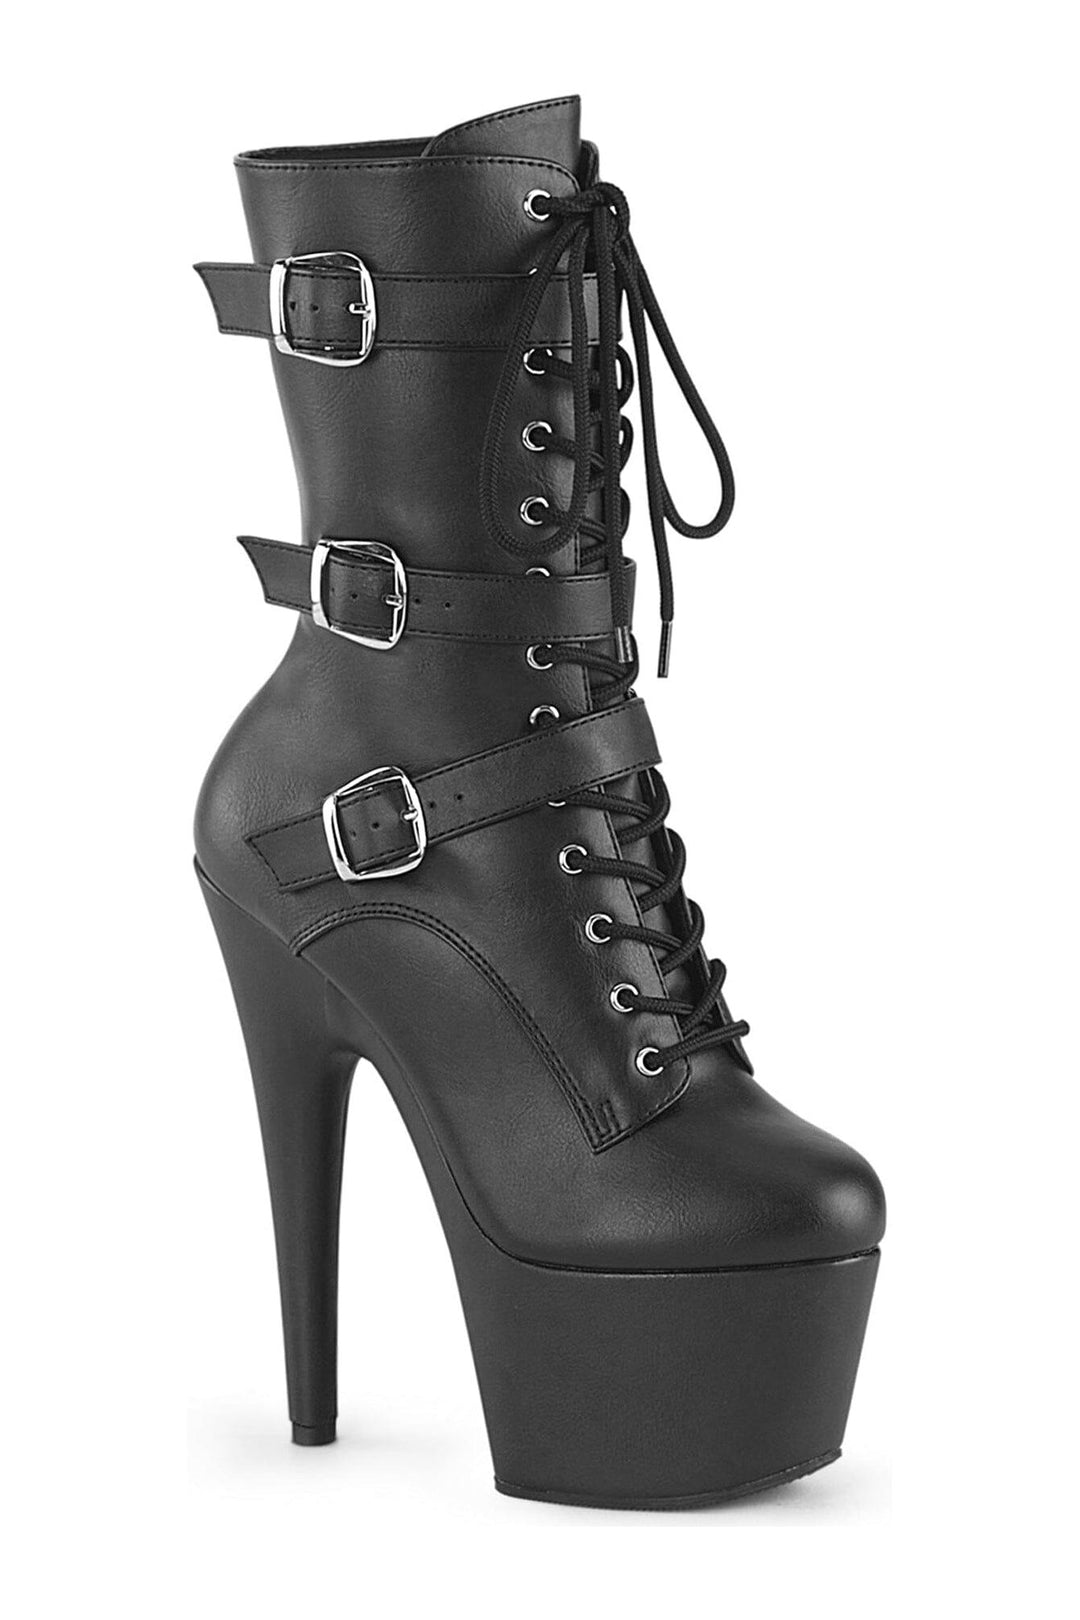 ADORE-1043 Black Faux Leather Ankle Boot-Ankle Boots-Pleaser-Black-10-Faux Leather-SEXYSHOES.COM